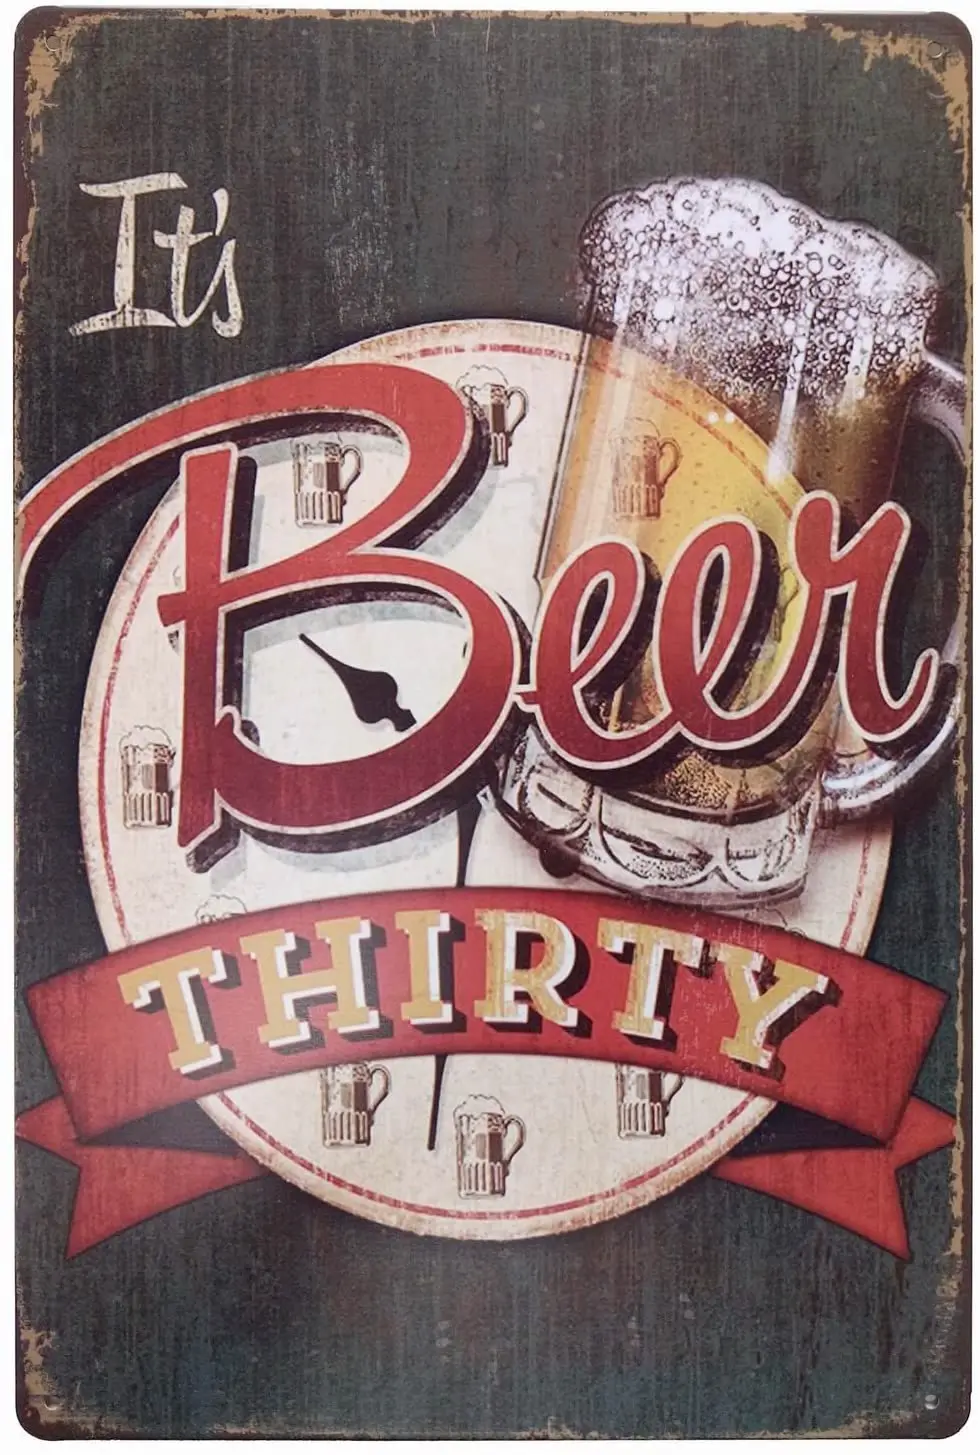 

It's Beer Thirty Vintage Funny Home Decor Tin Sign Retro Metal Bar Pub Poster 8 x 12